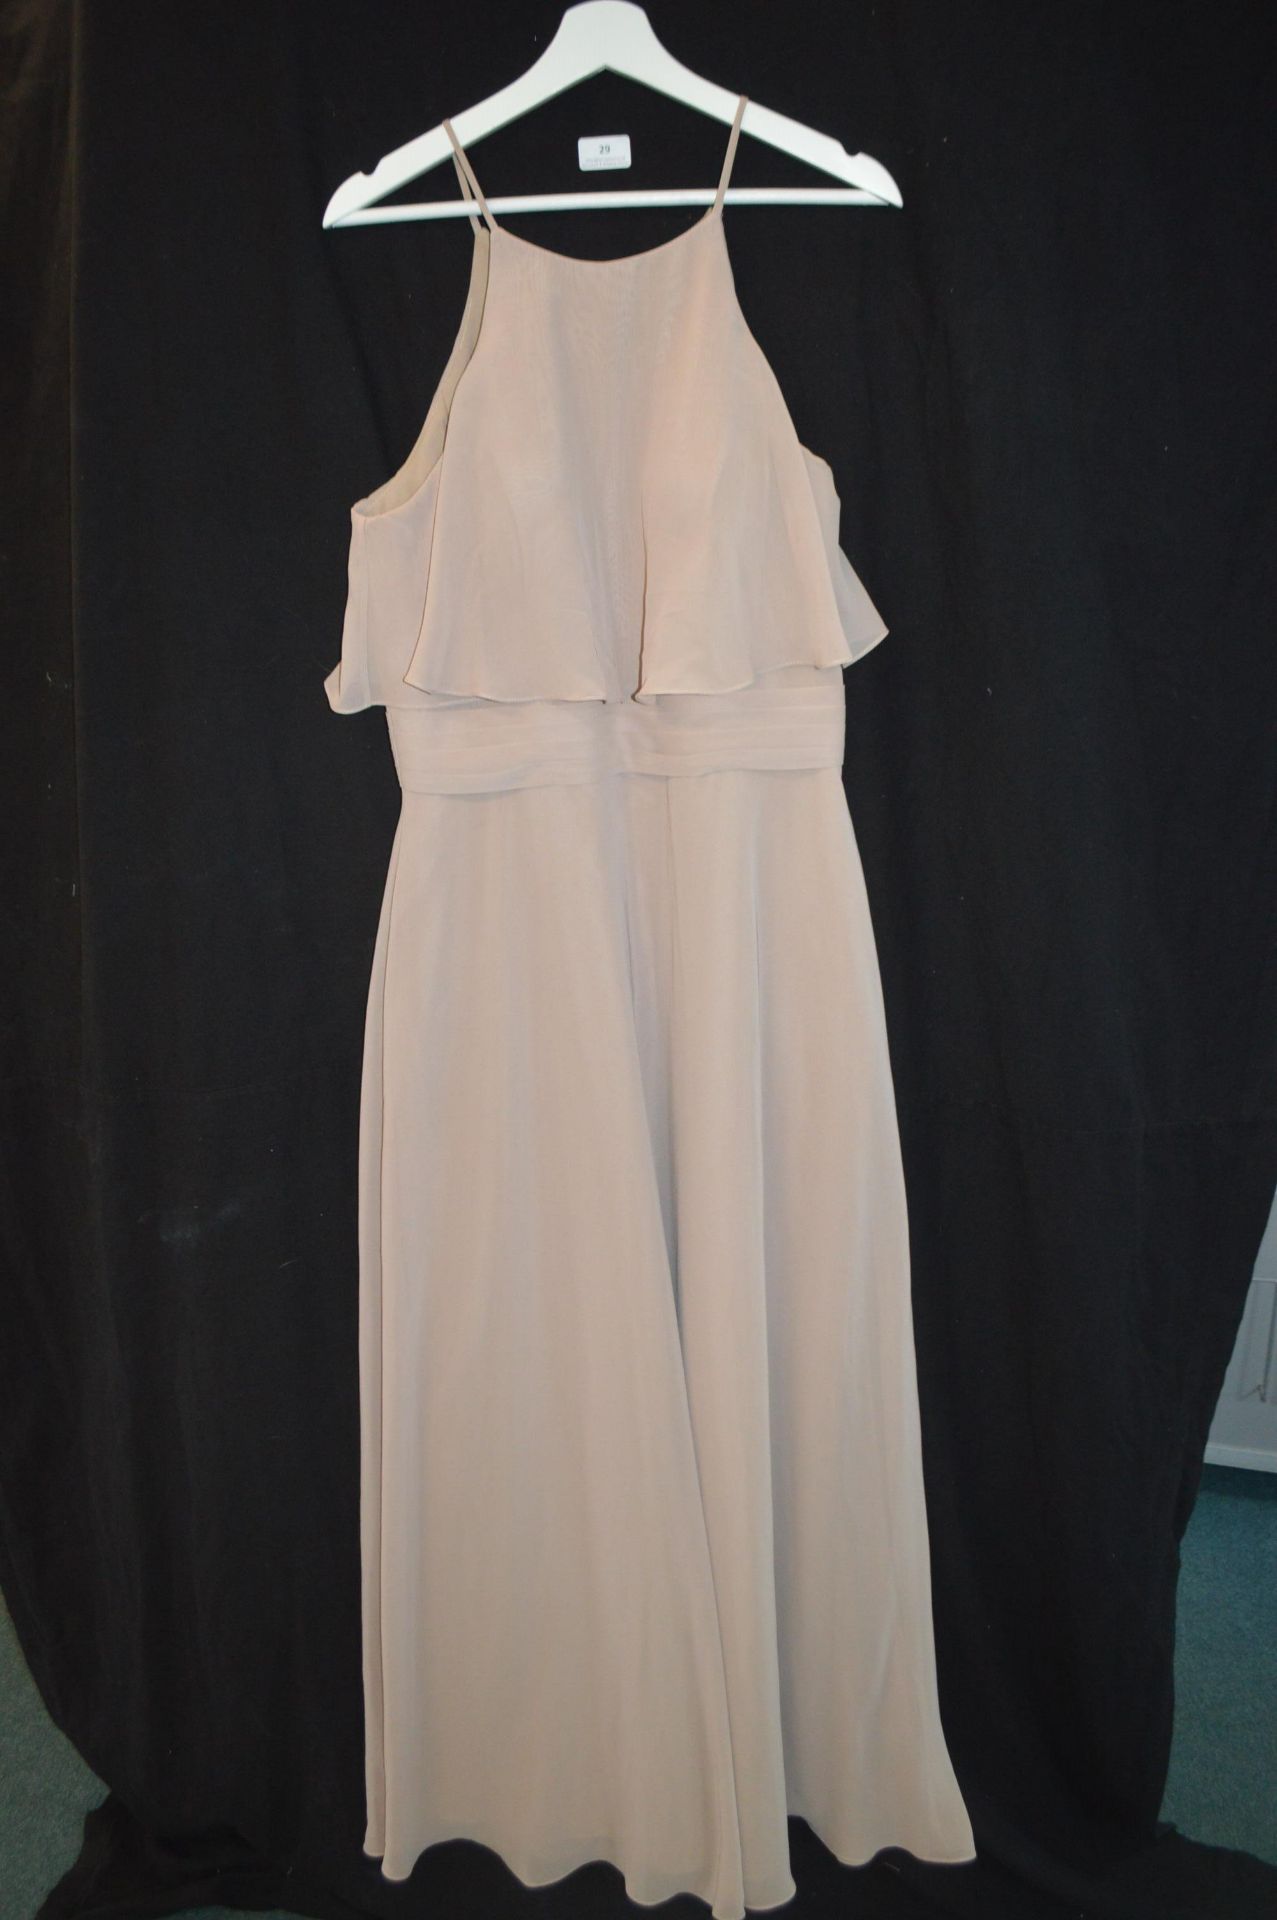 Prom Dress in Mocha by Kenneth Winston for Private Label Size: 14